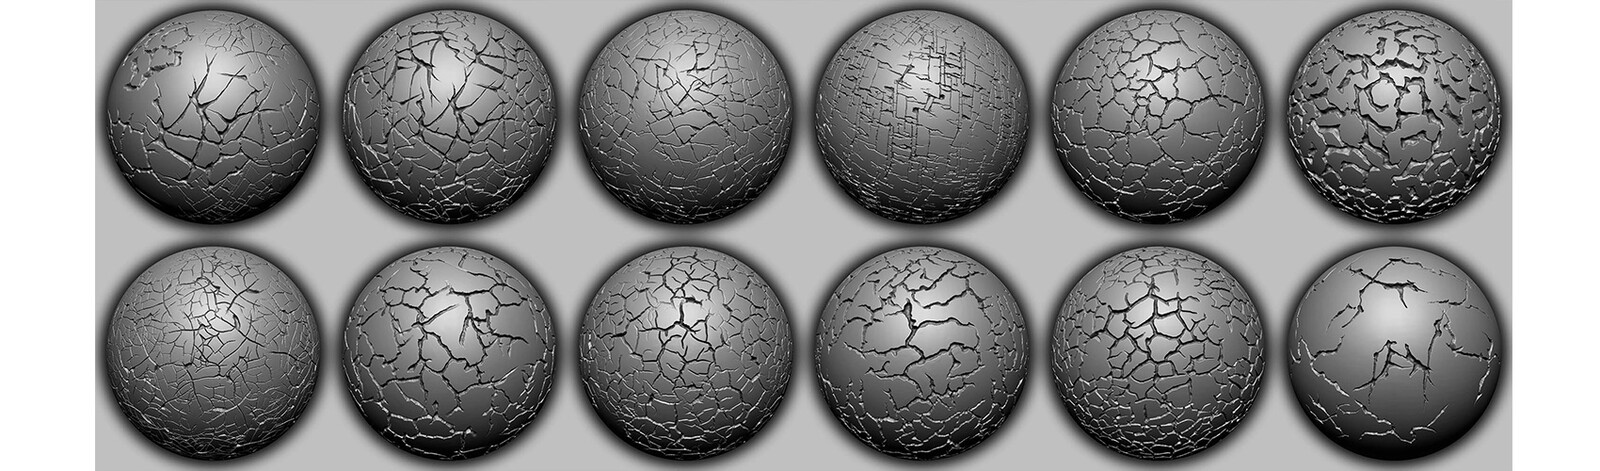 20 VDM Crack Brushes and Alphas for ZBrush (By Yacine BRINIS) Vol1 Set 008